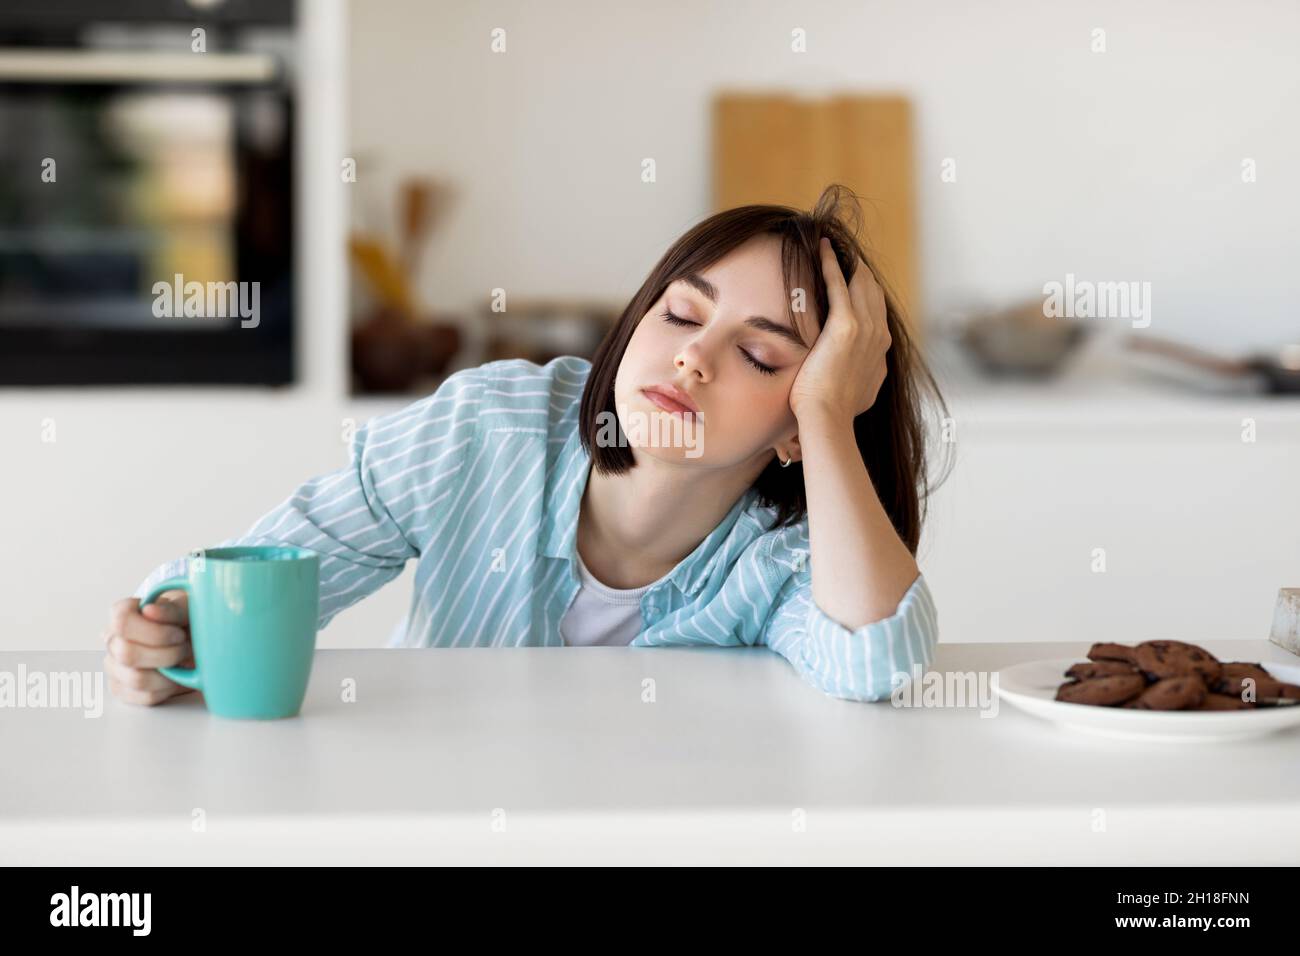 Sleepy young woman drinking coffee, feeling tired, suffering from insomnia and sleeping disorder, sitting in kitchen Stock Photo